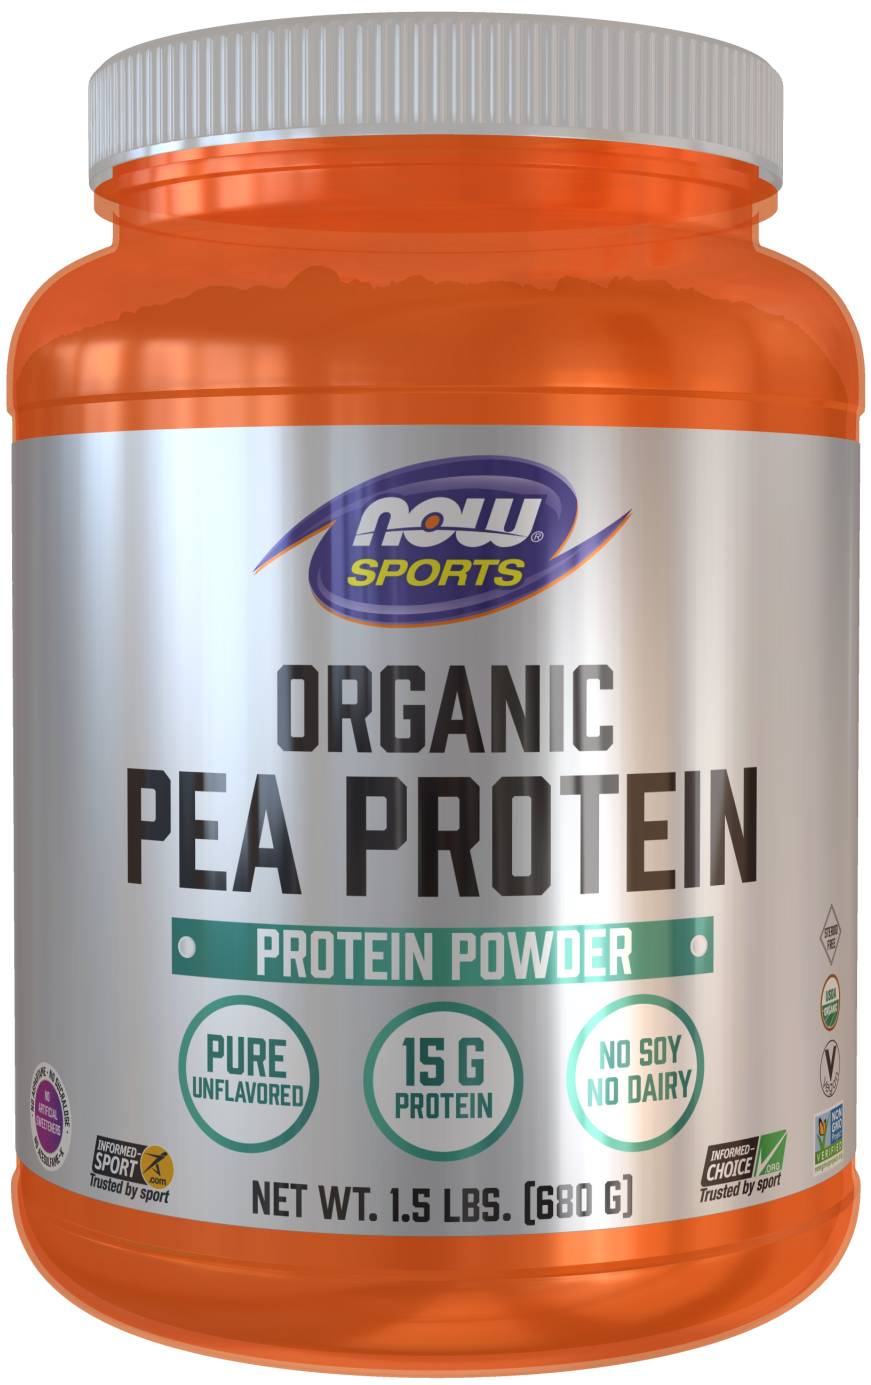 Organic Pea Protein Powder By Now Foods